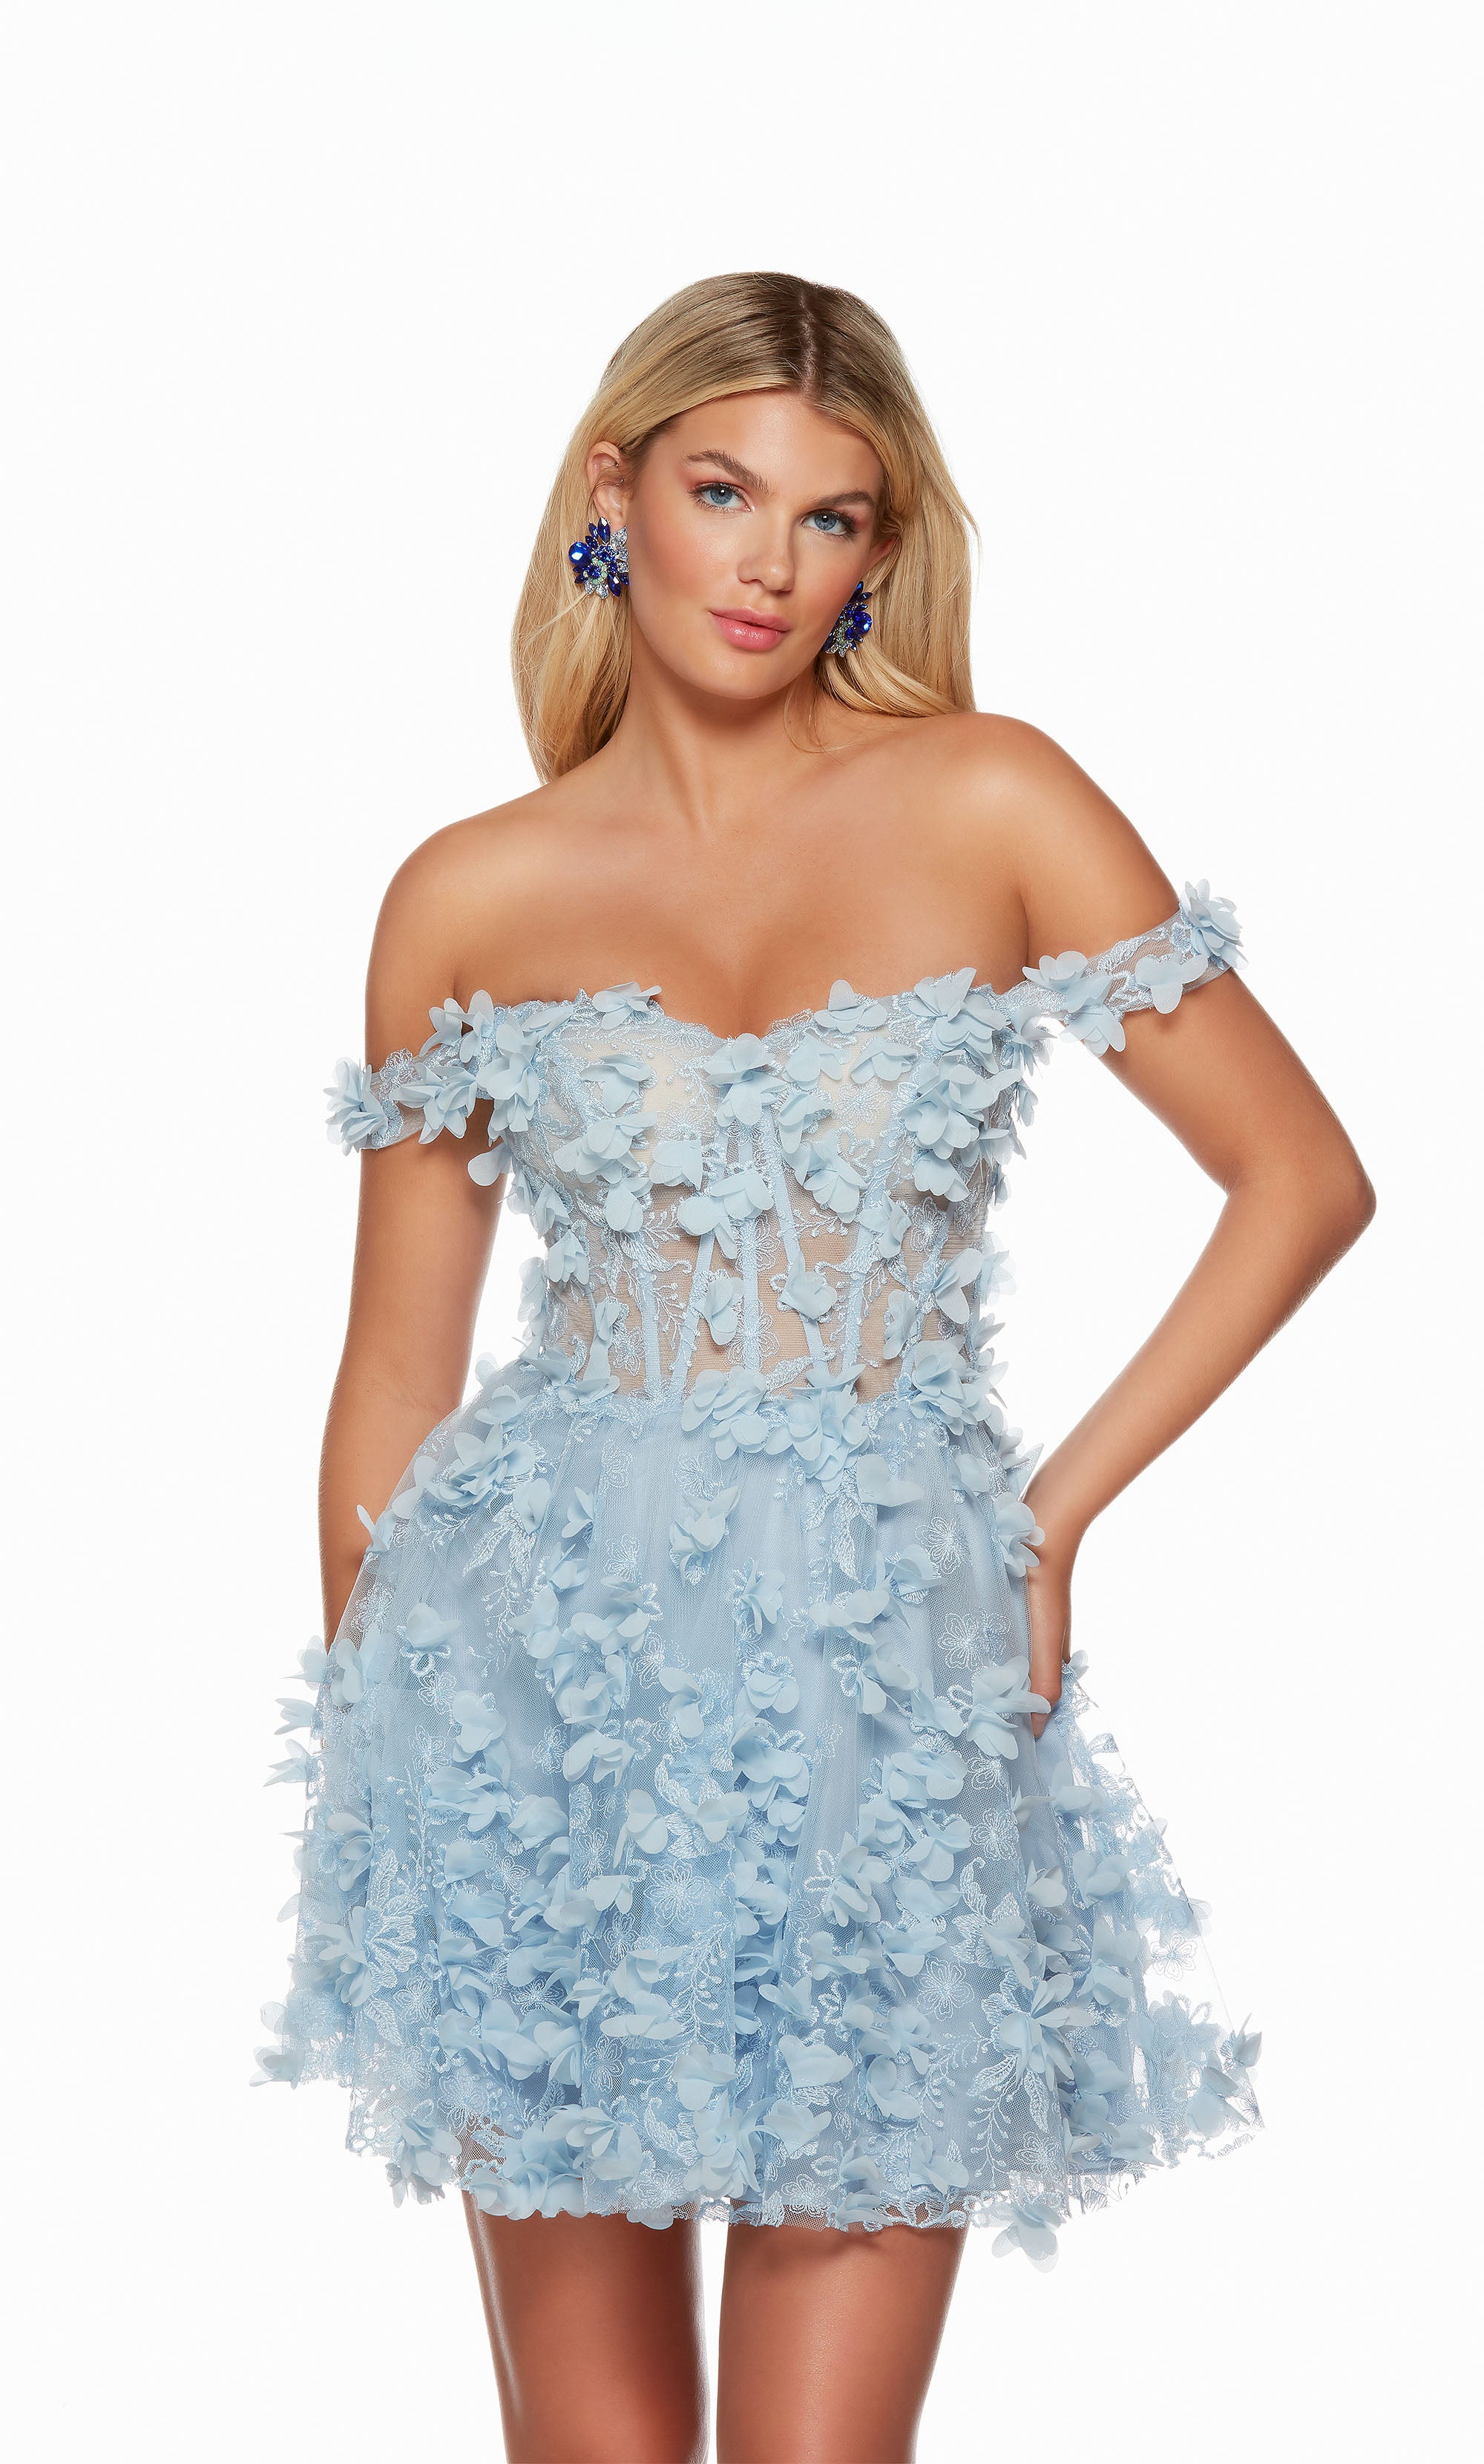 Corset Dresses: Stunning New Collections of Corset Dress! 